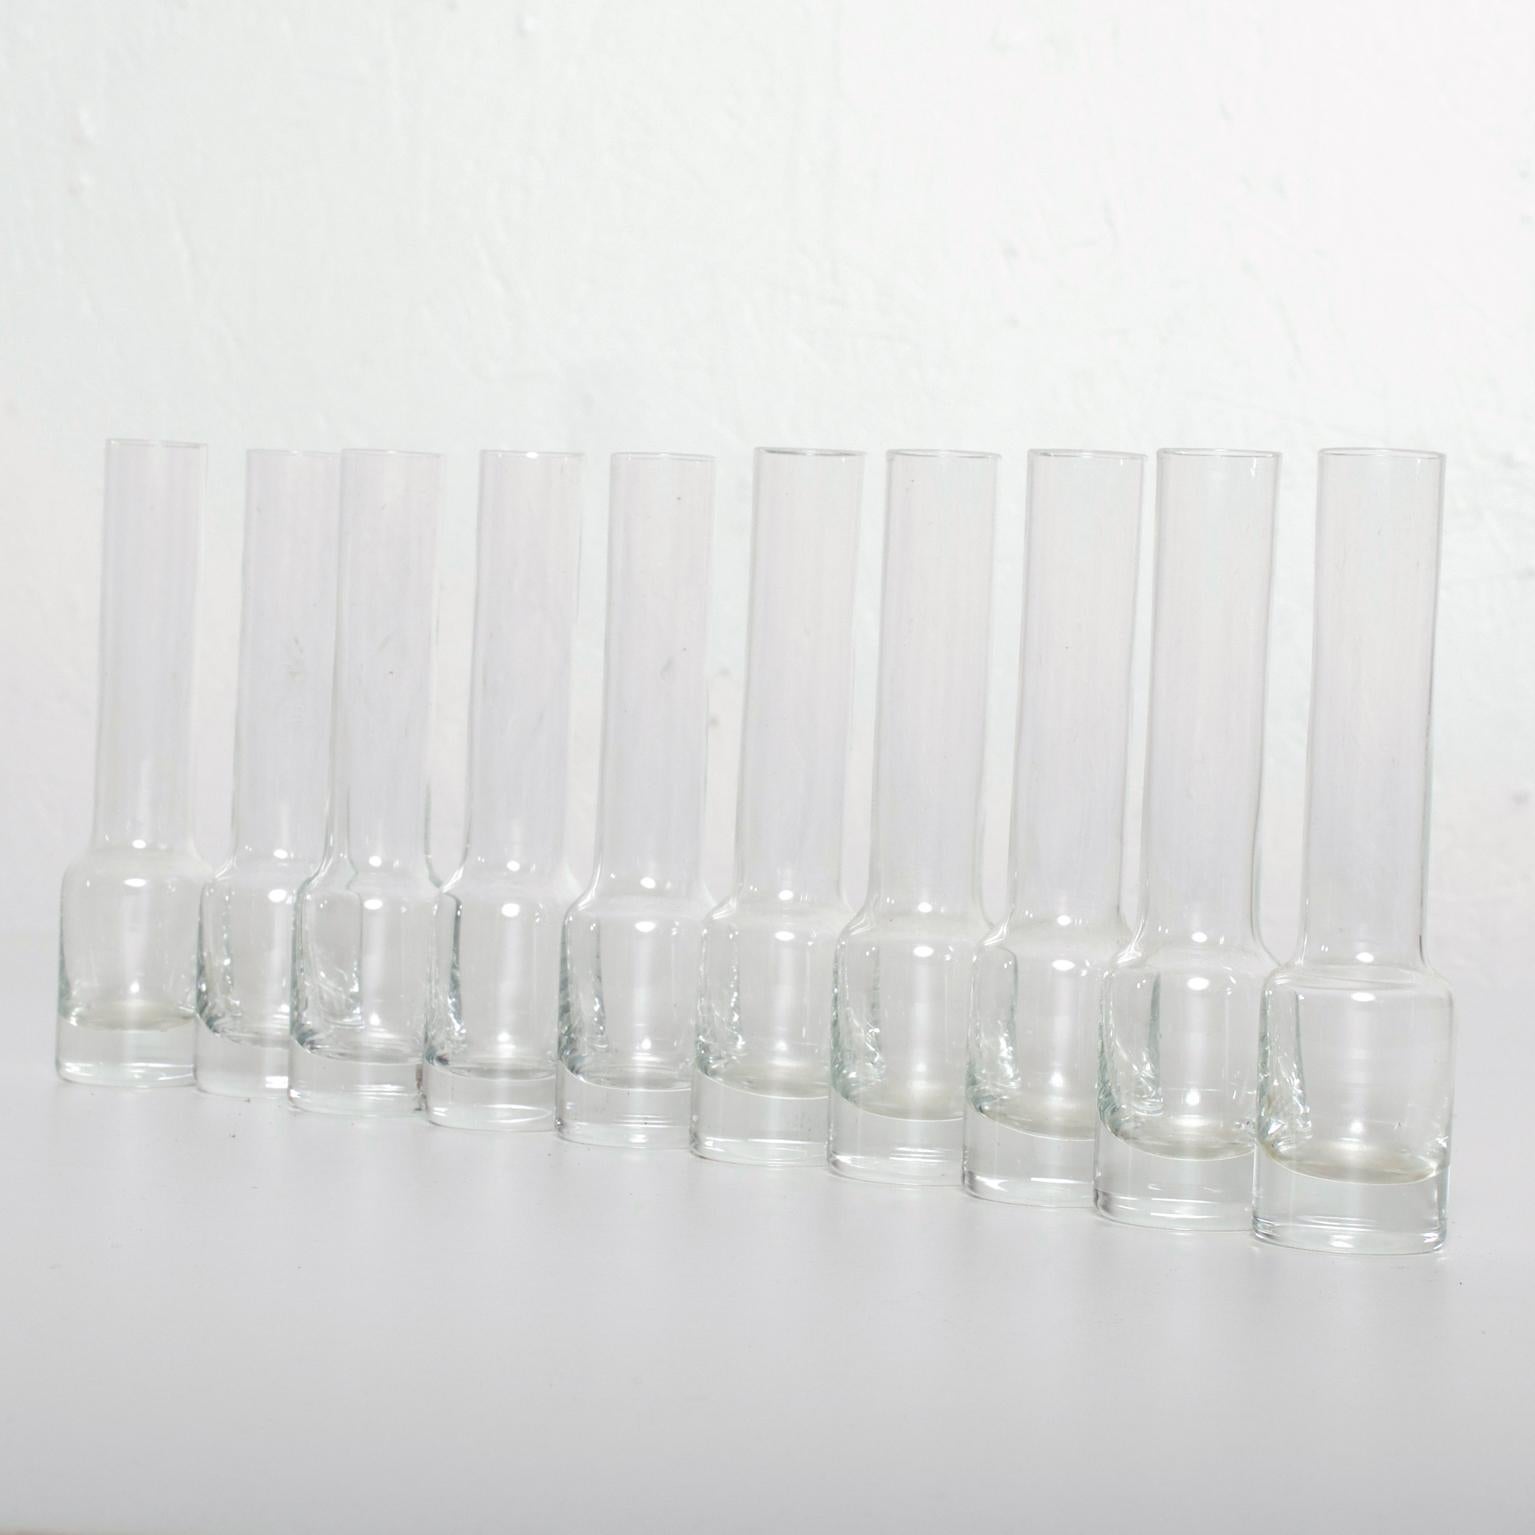 For Your Pleasure a Set of 10 Mid Century Modern Tequila Glass Shots Original Vintage Condition Dimensions are : 5 3/4